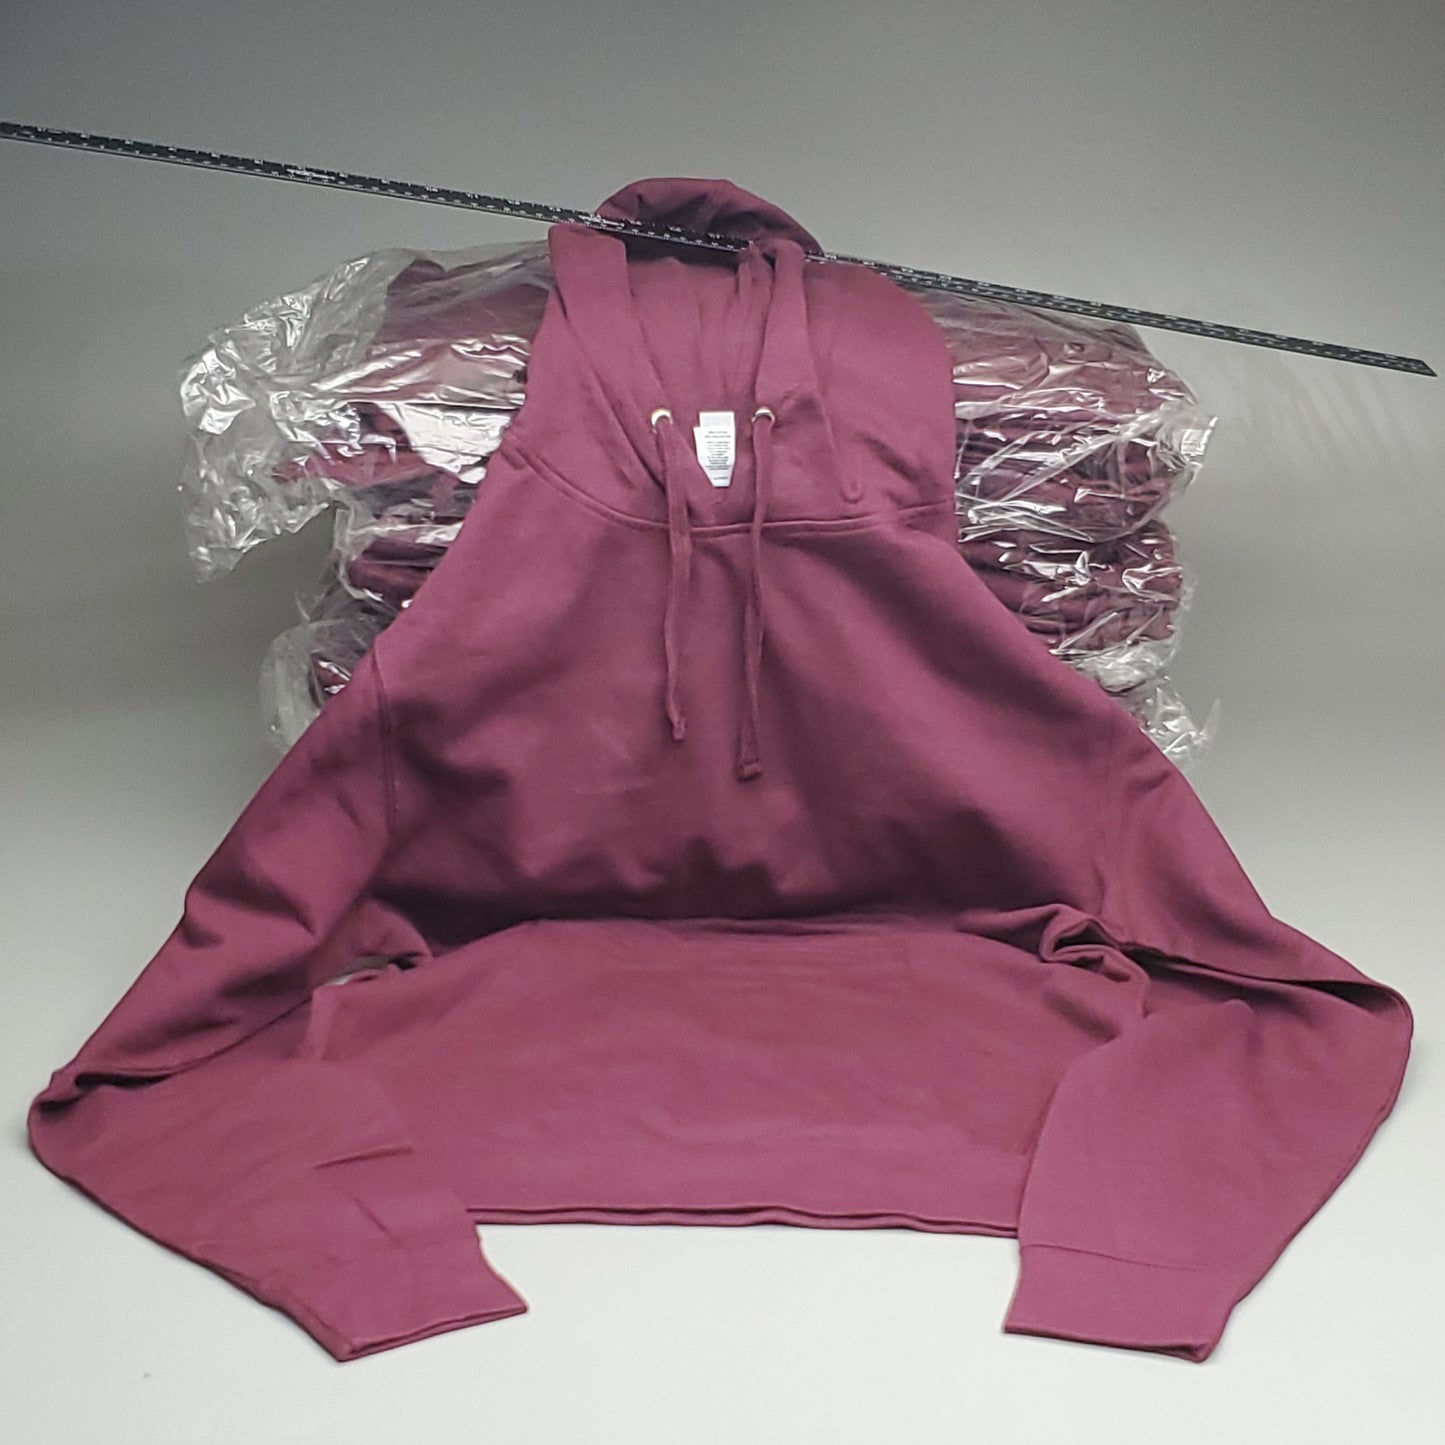 INDEPENDENT TRADING CO. 24 PK! Pullover Hoodies Sz S Maroon (New)